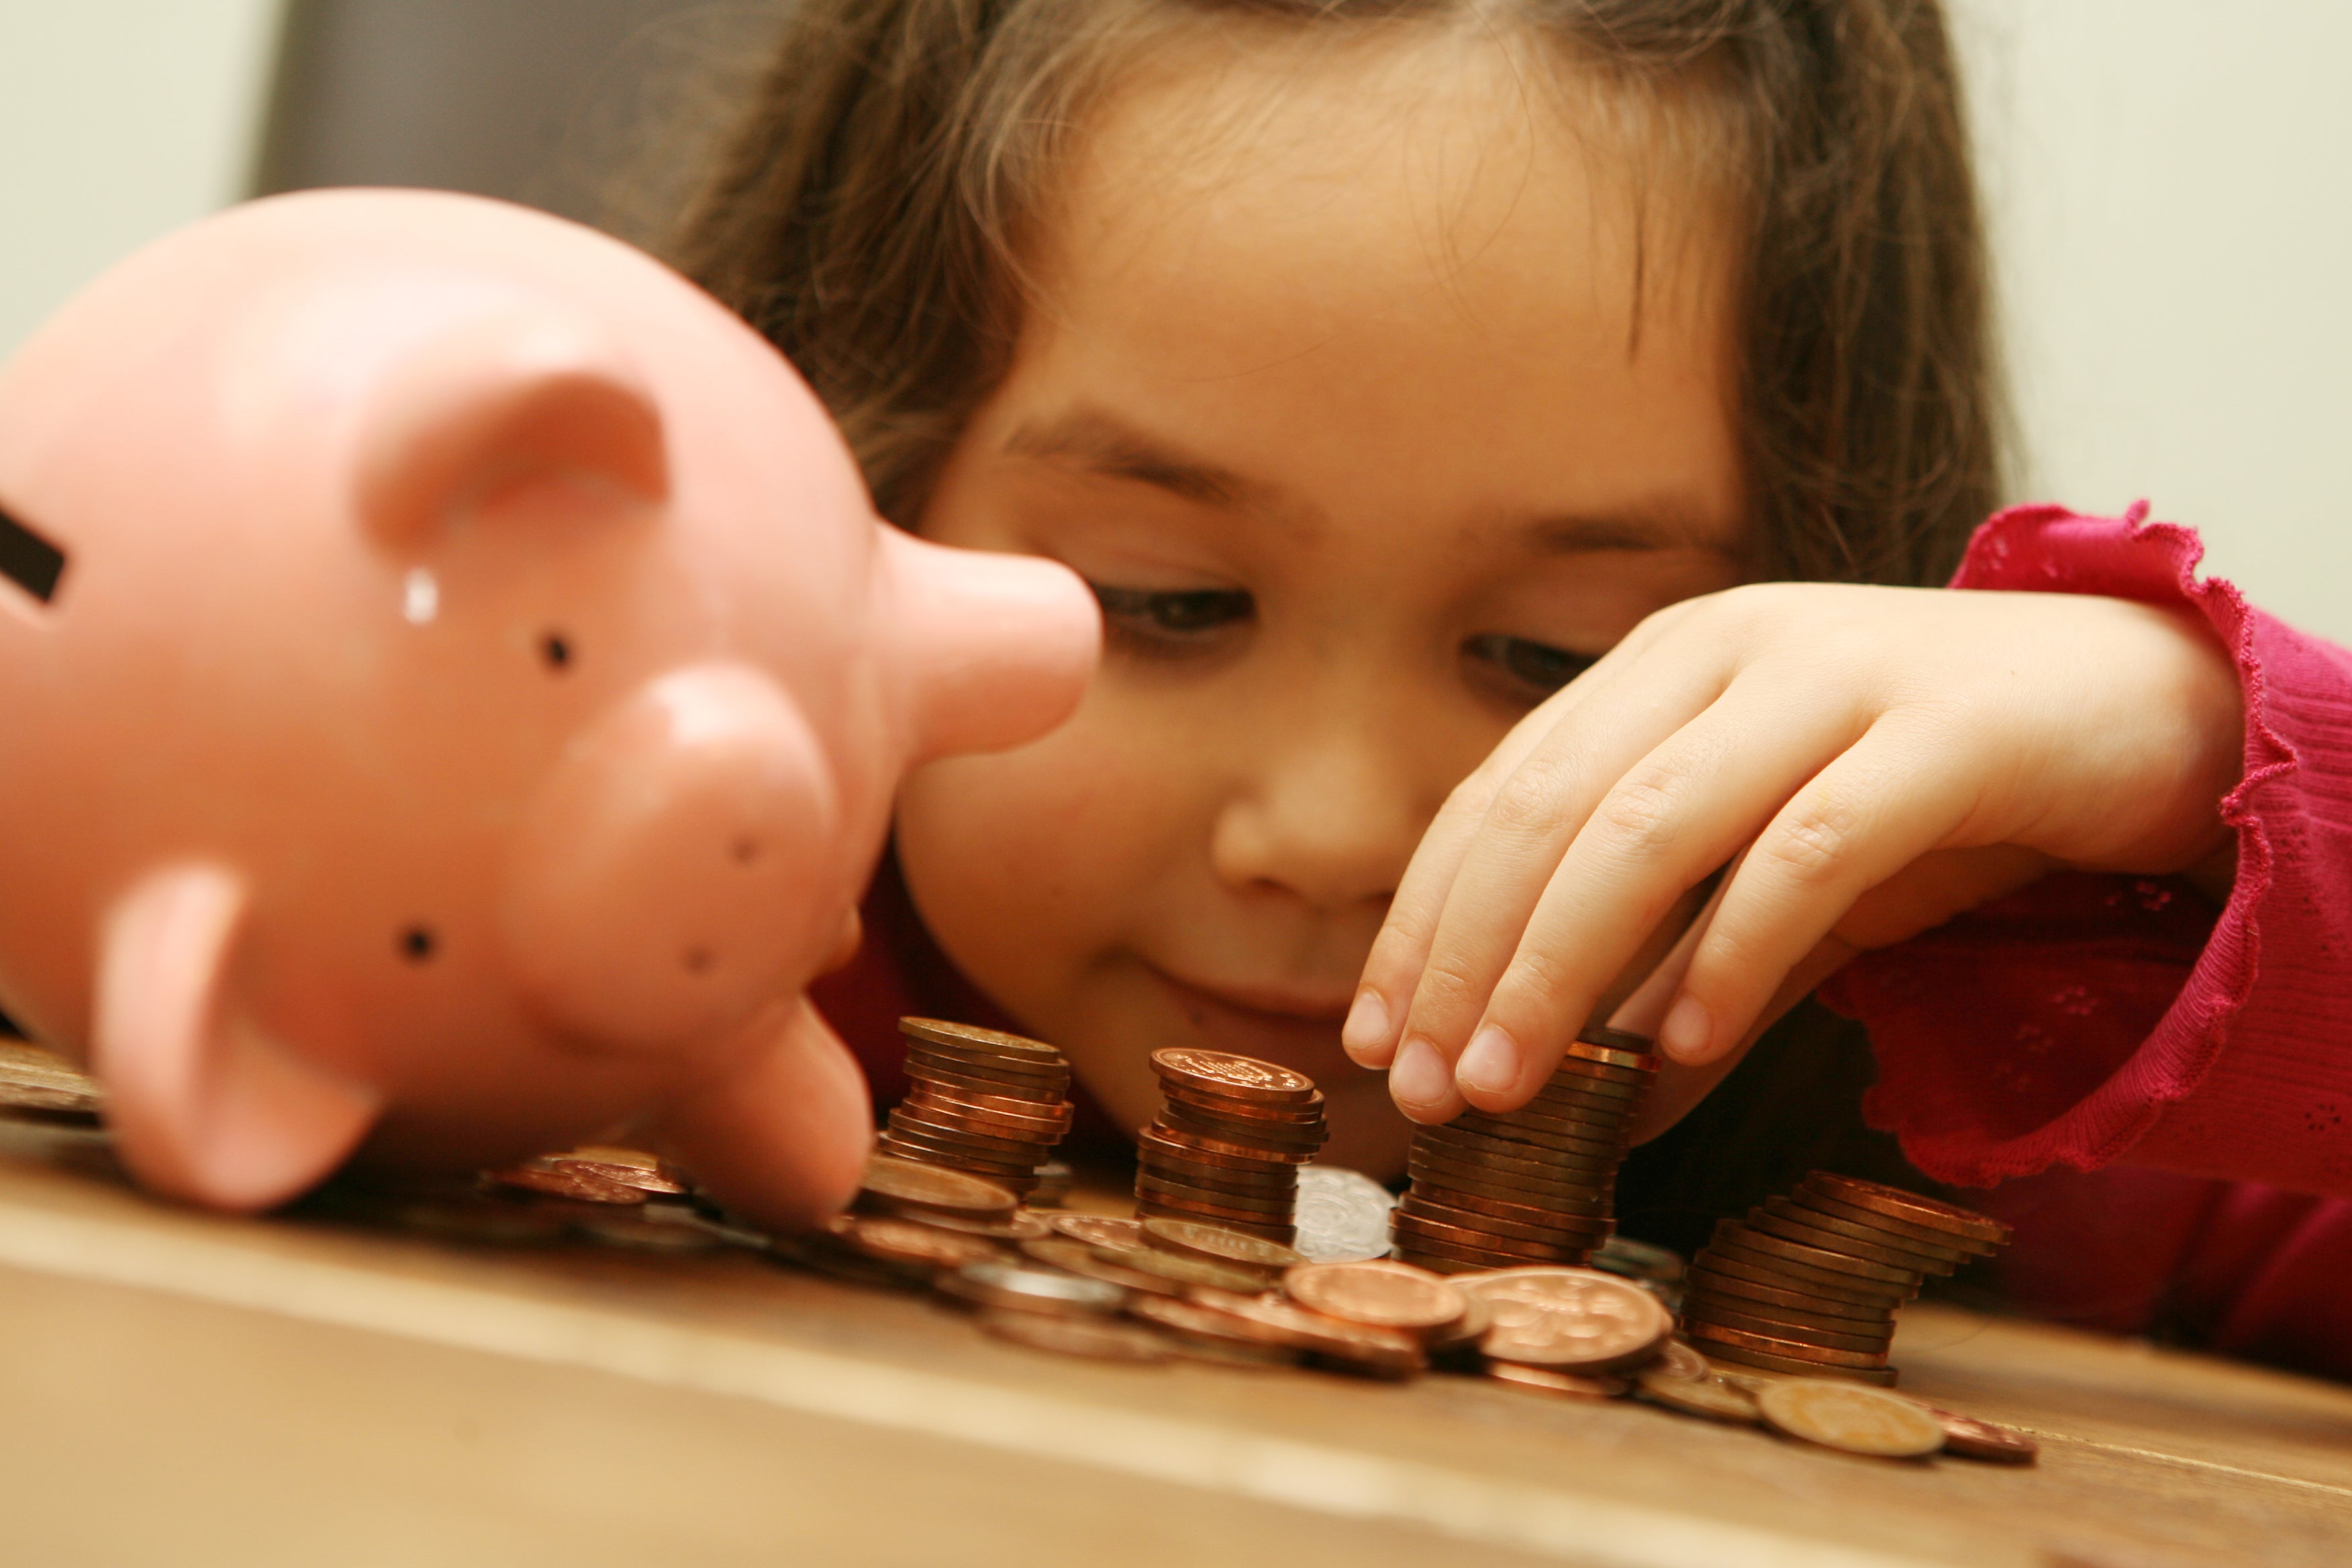 Talking openly will help children build healthy financial habits later in life